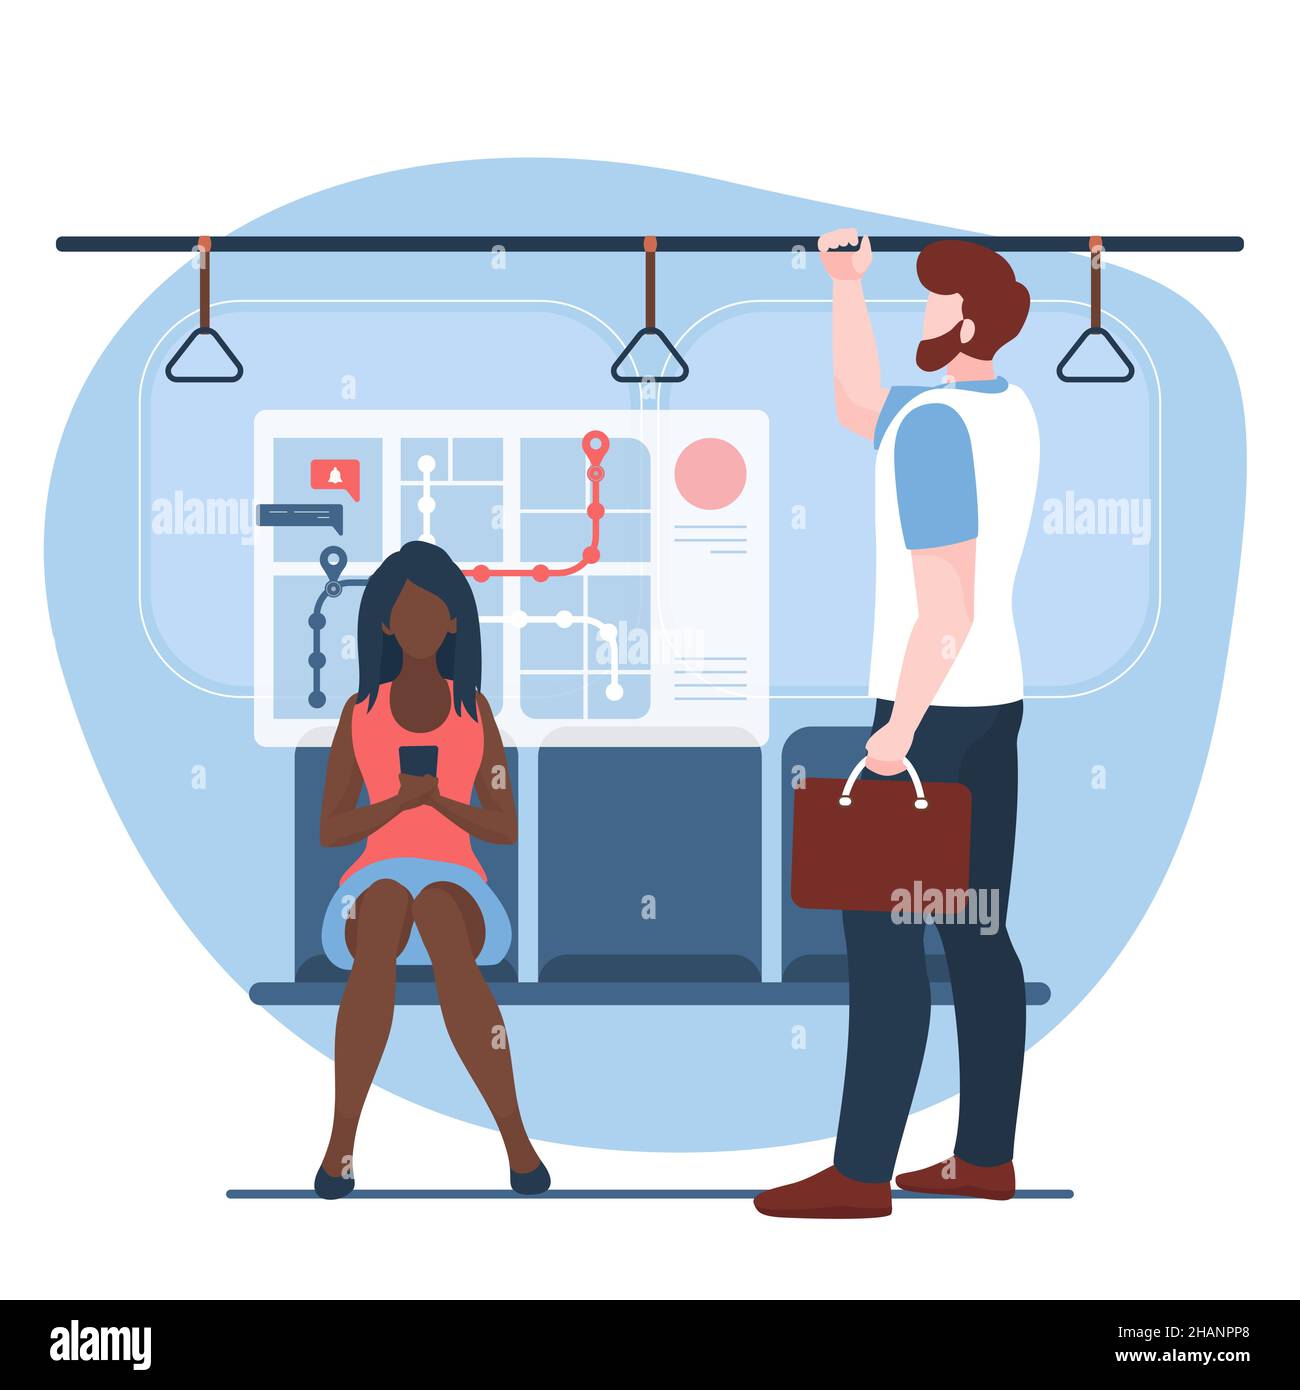 Passengers in metro train carriage inside vector illustration. Cartoon underground public transport with crowd of sitting and standing people, city map guidance on wall. Subway navigation concept Stock Vector